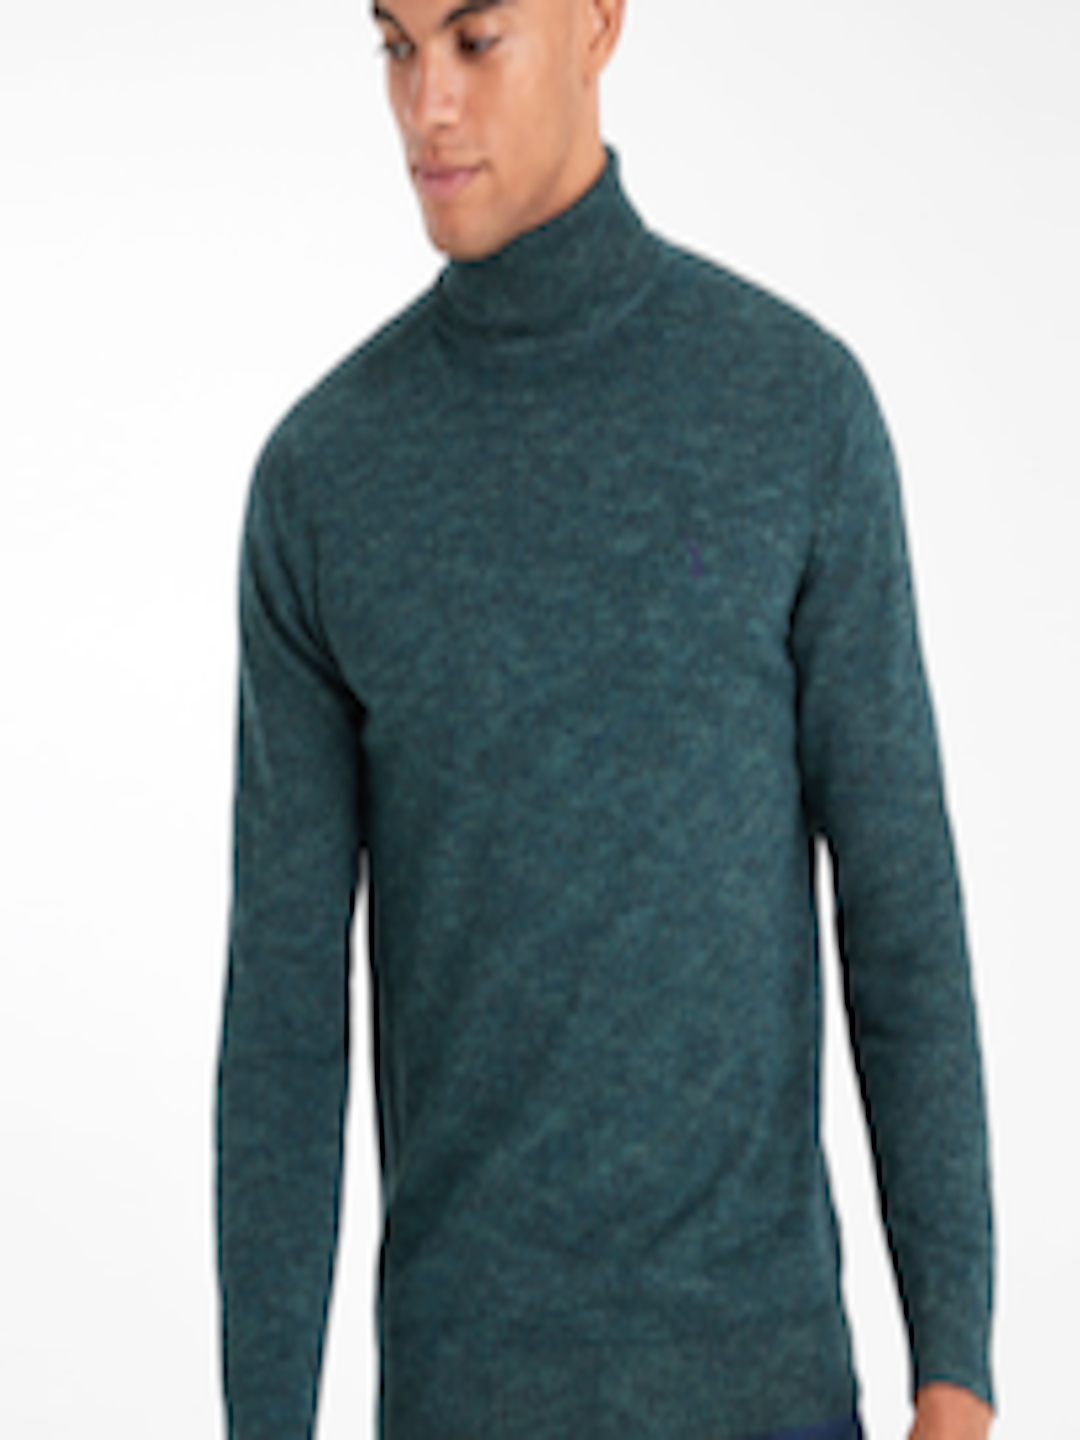 Buy Next Men Green Solid Sweater - Sweaters for Men 10900746 | Myntra